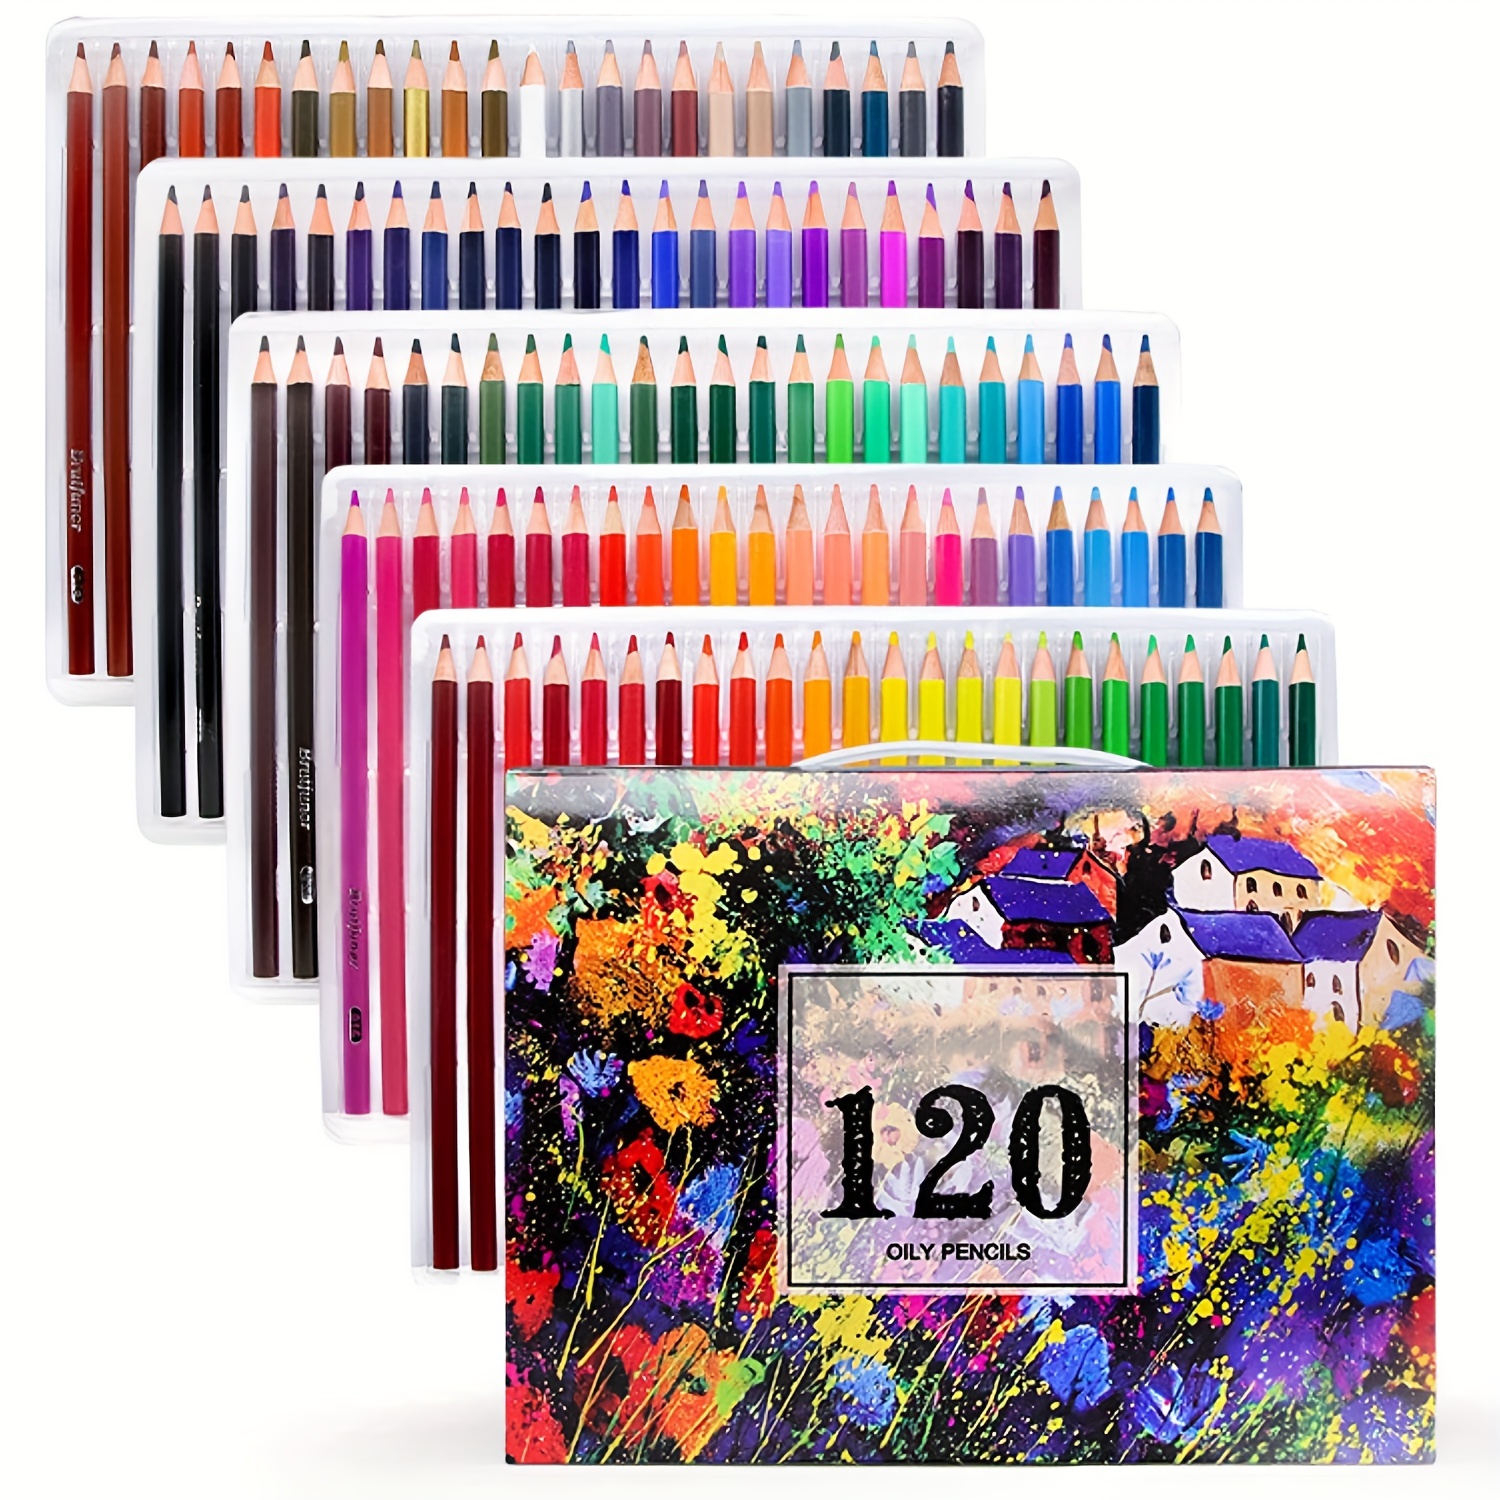 Artist's Choice 120 Colored Pencils (GIANT EXTRA LARGE SET